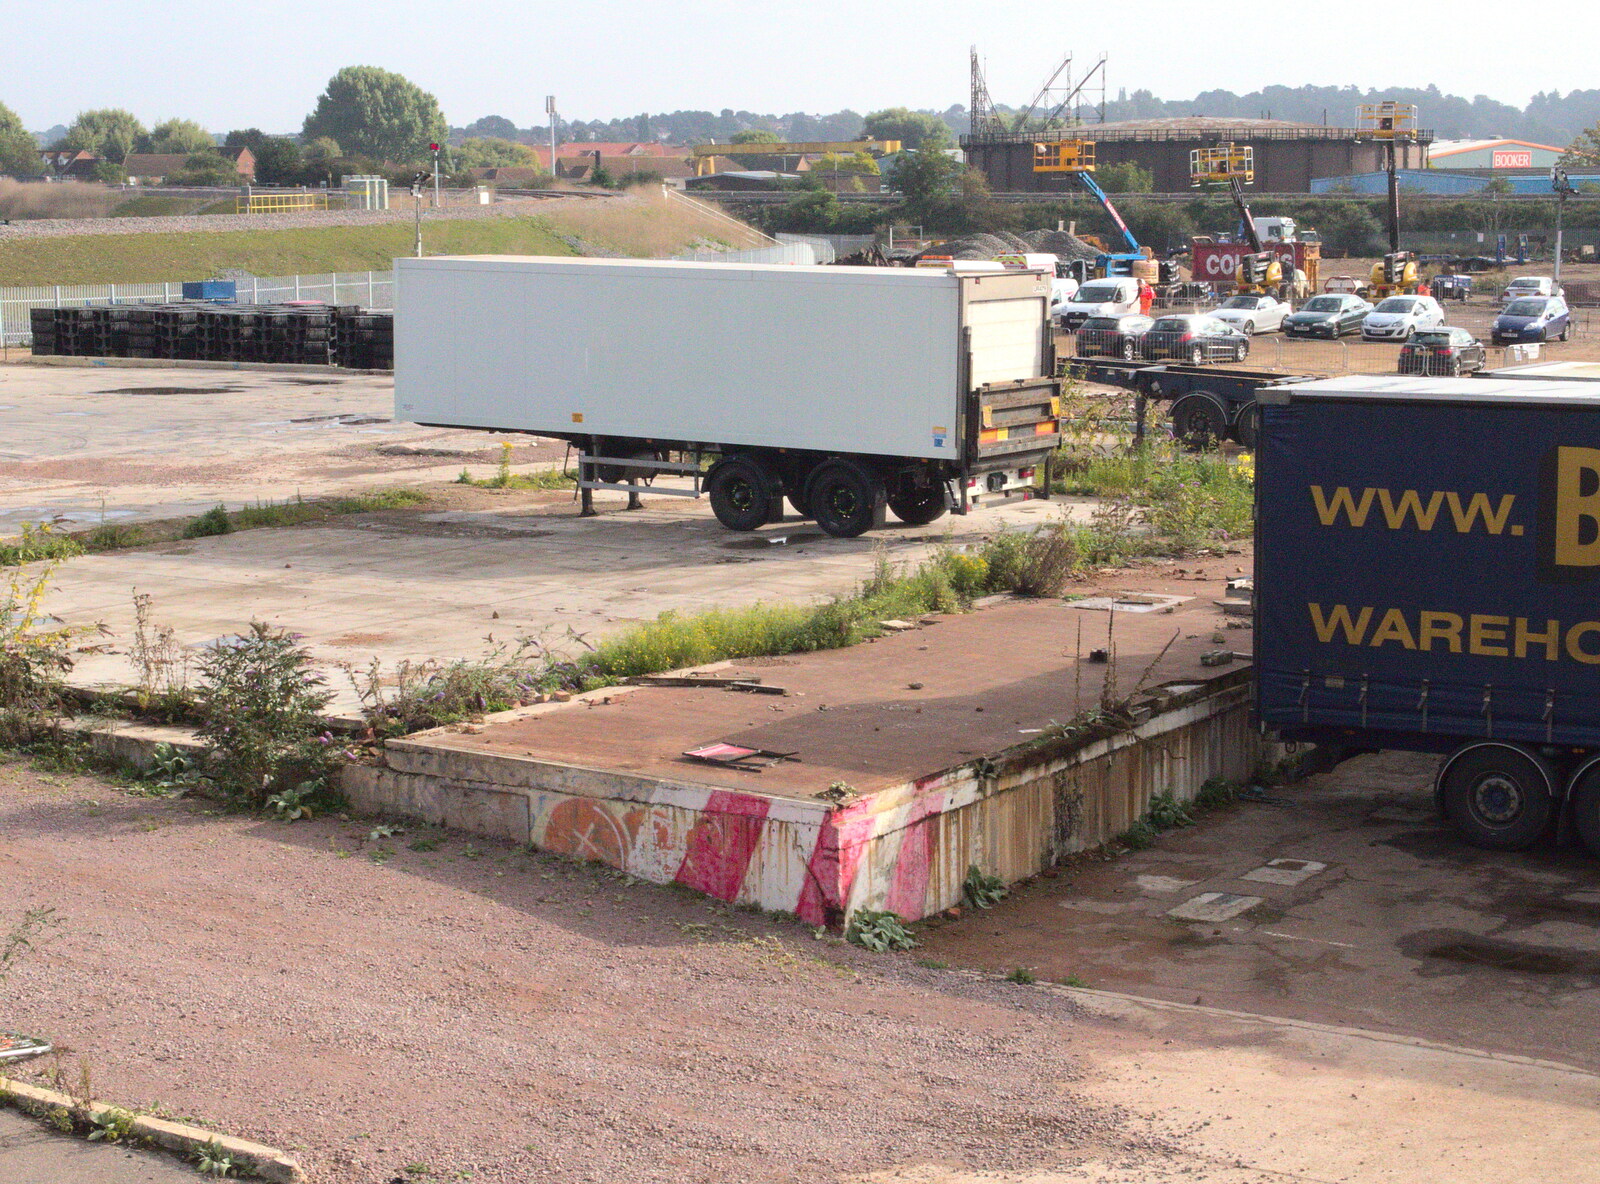 The last remains of the bacon factory from New Railway and a Trip to Ikea, Ipswich and Thurrock - 19th September 2014